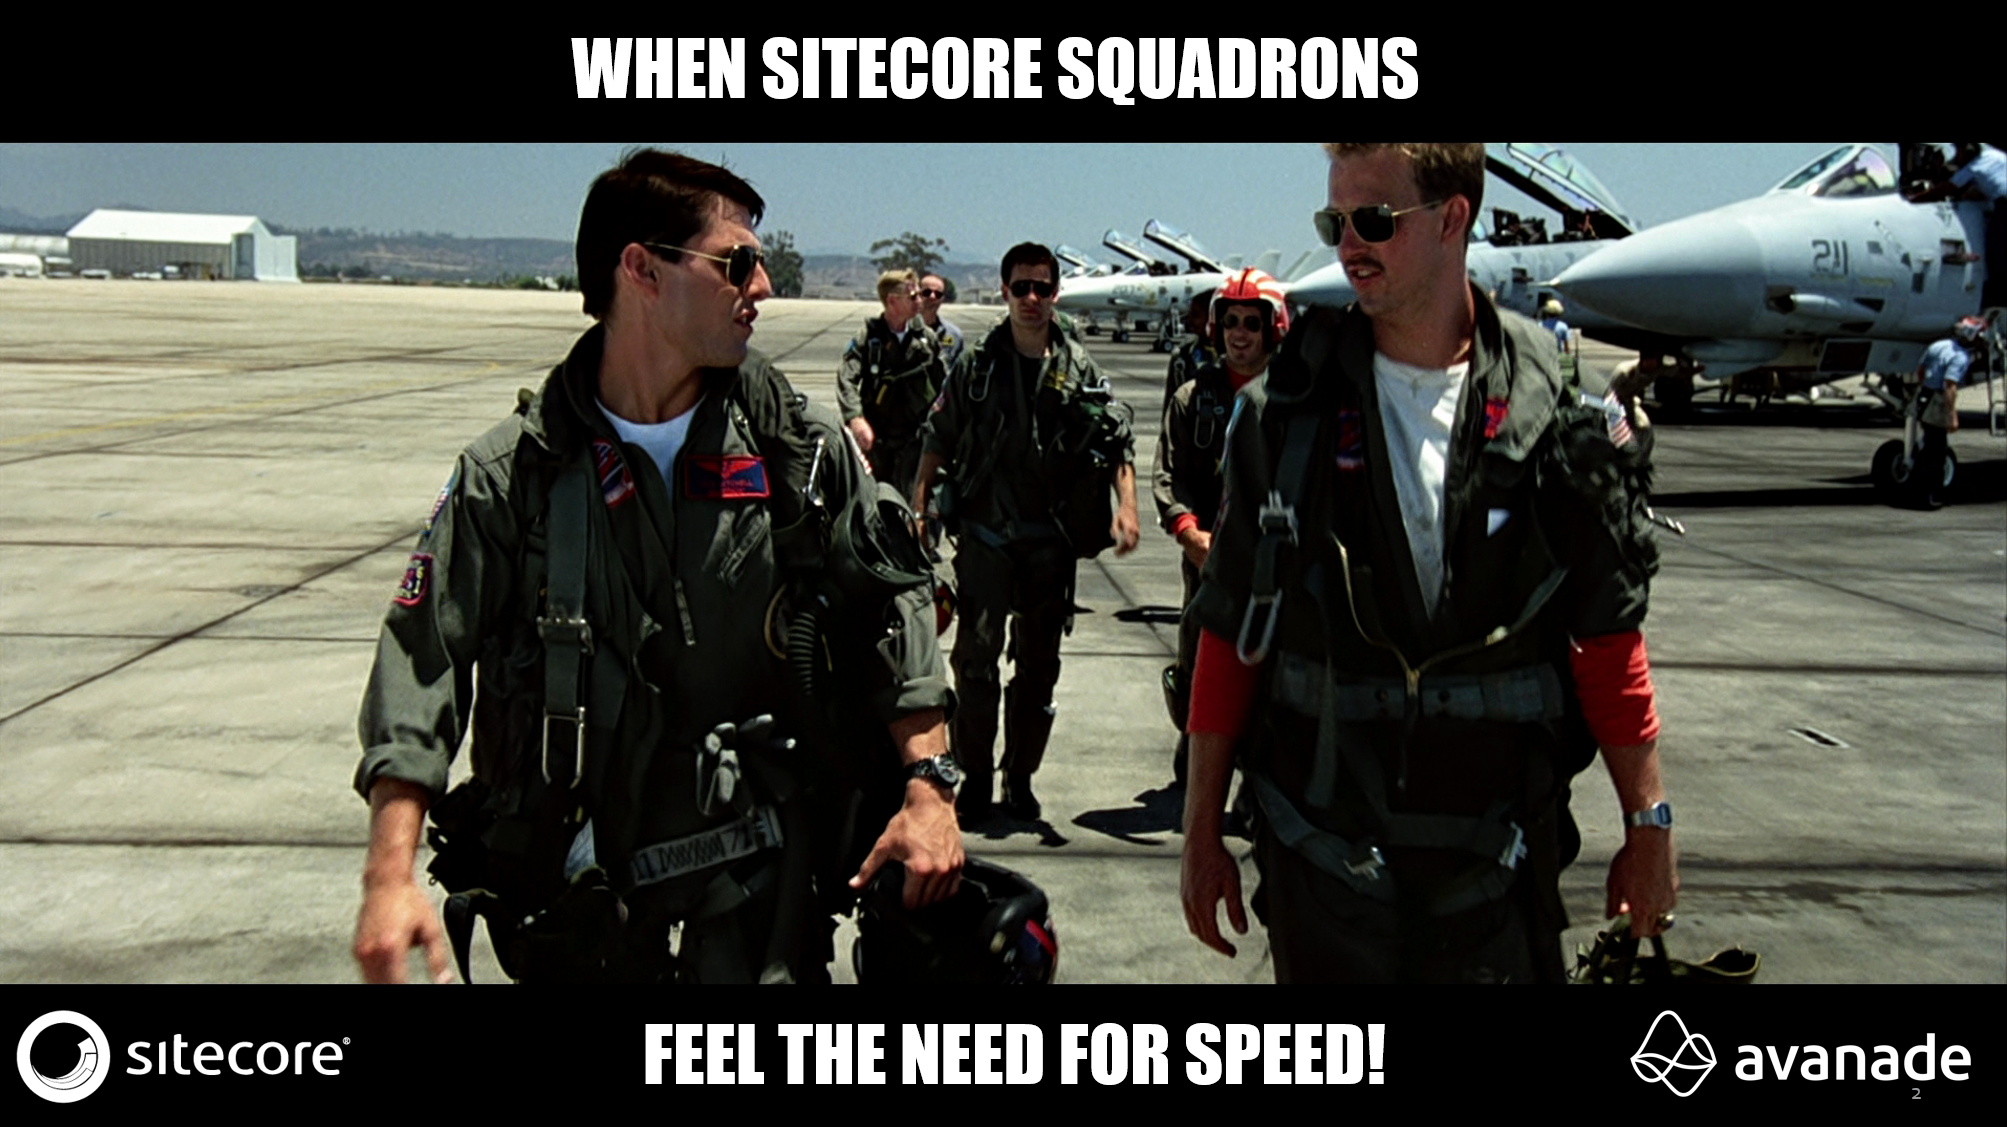 When Sitecore Squadrons feel the need for speed slides